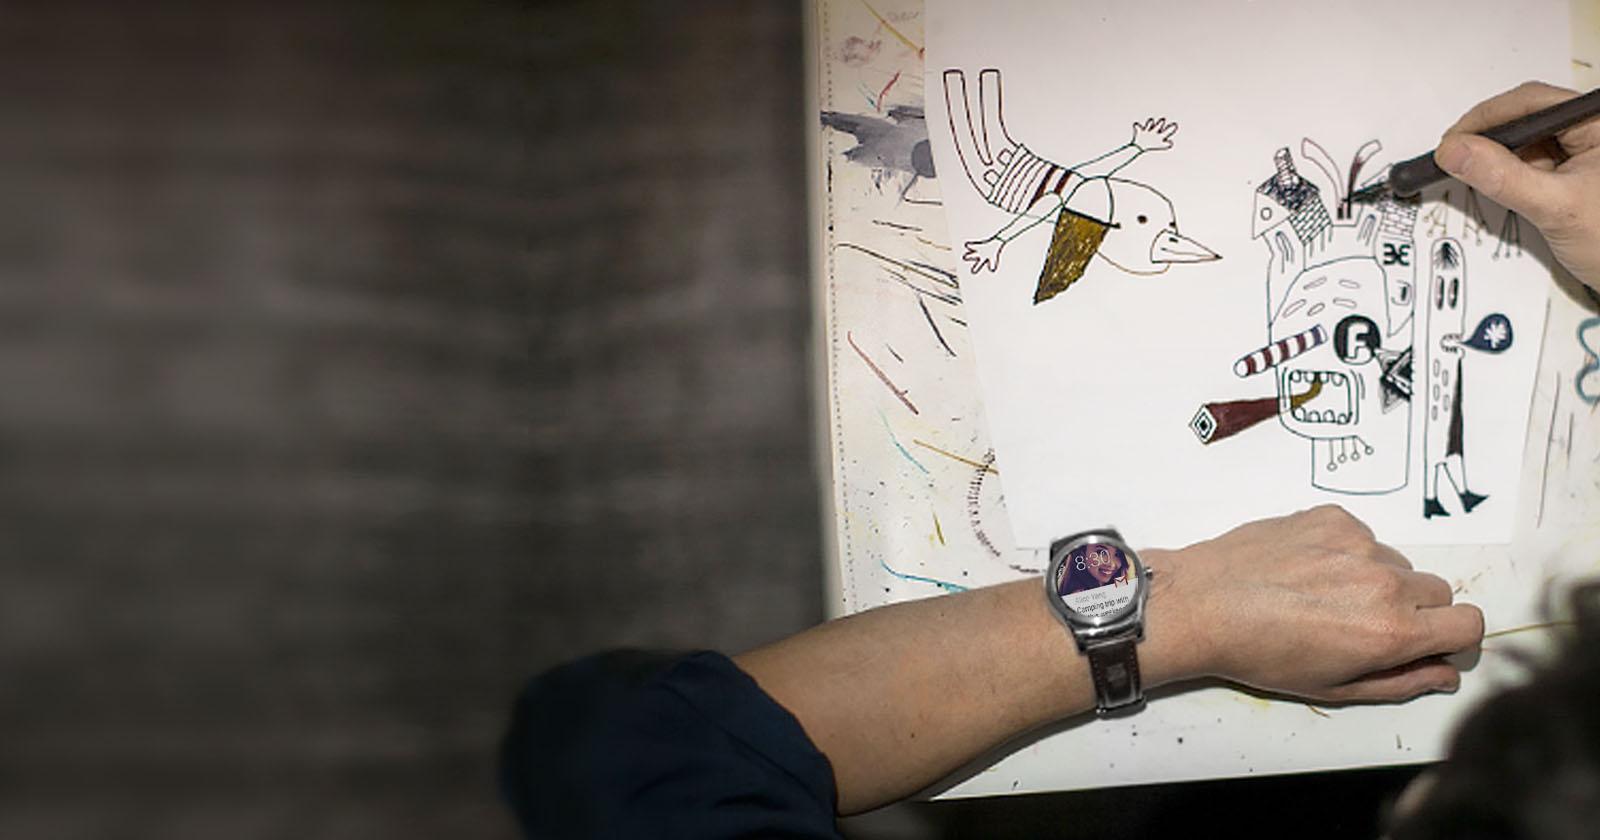 Image of person drawing while simultaneously using the LG Watch Urbane Gold